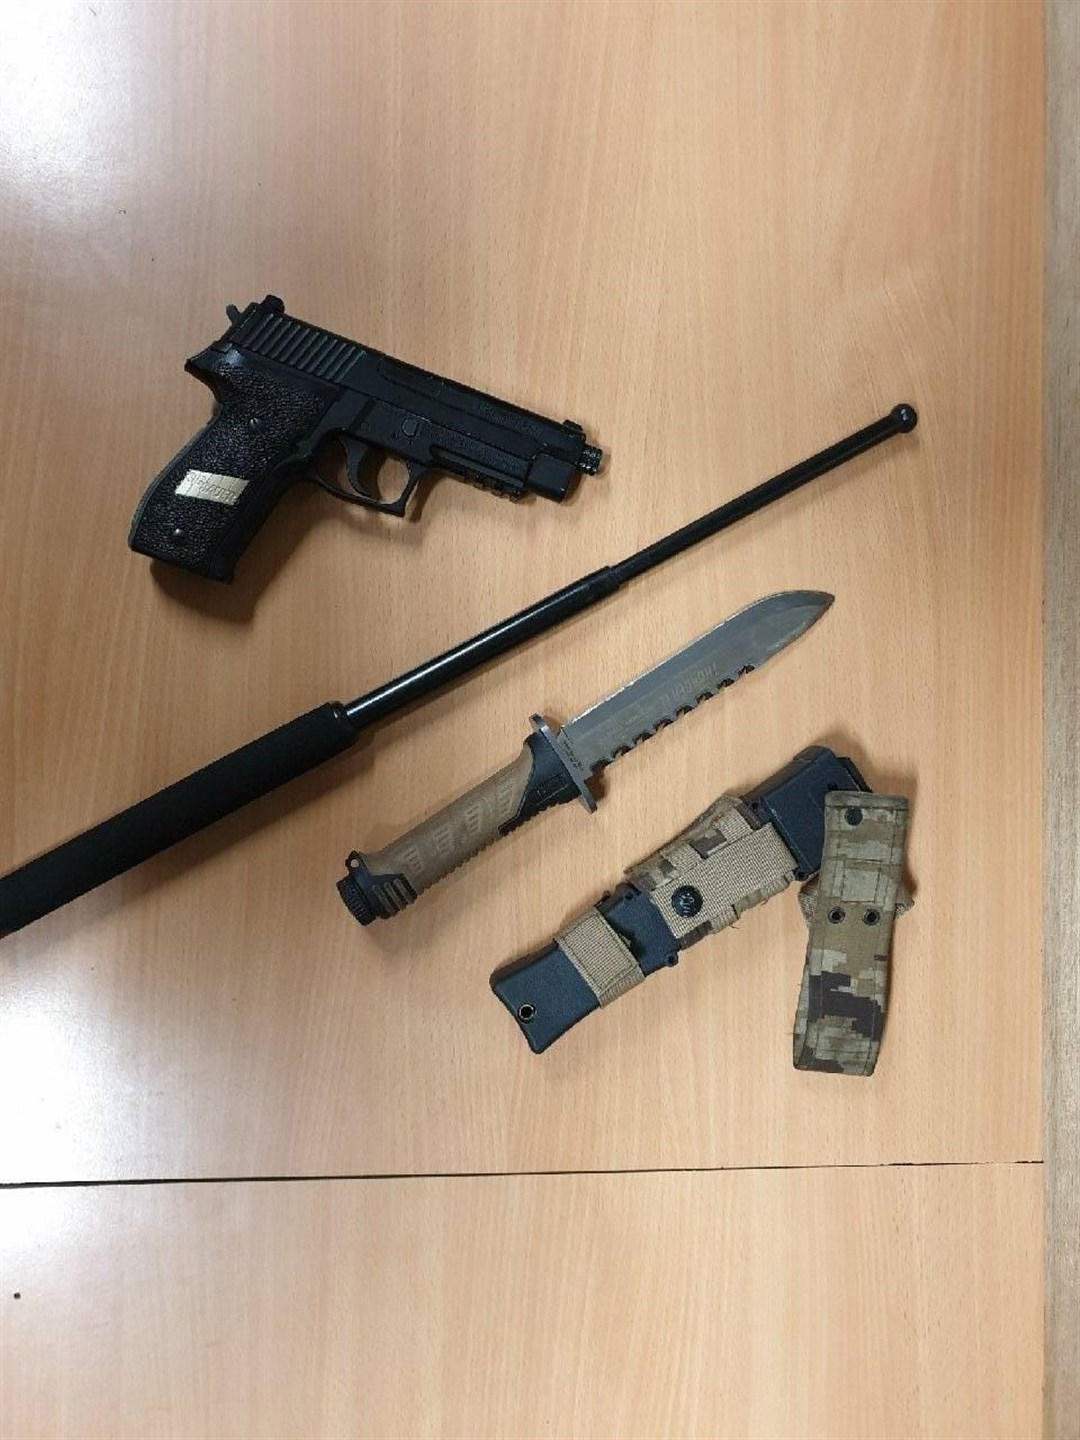 Weapons found after a motorist was pulled over in Fochabers.